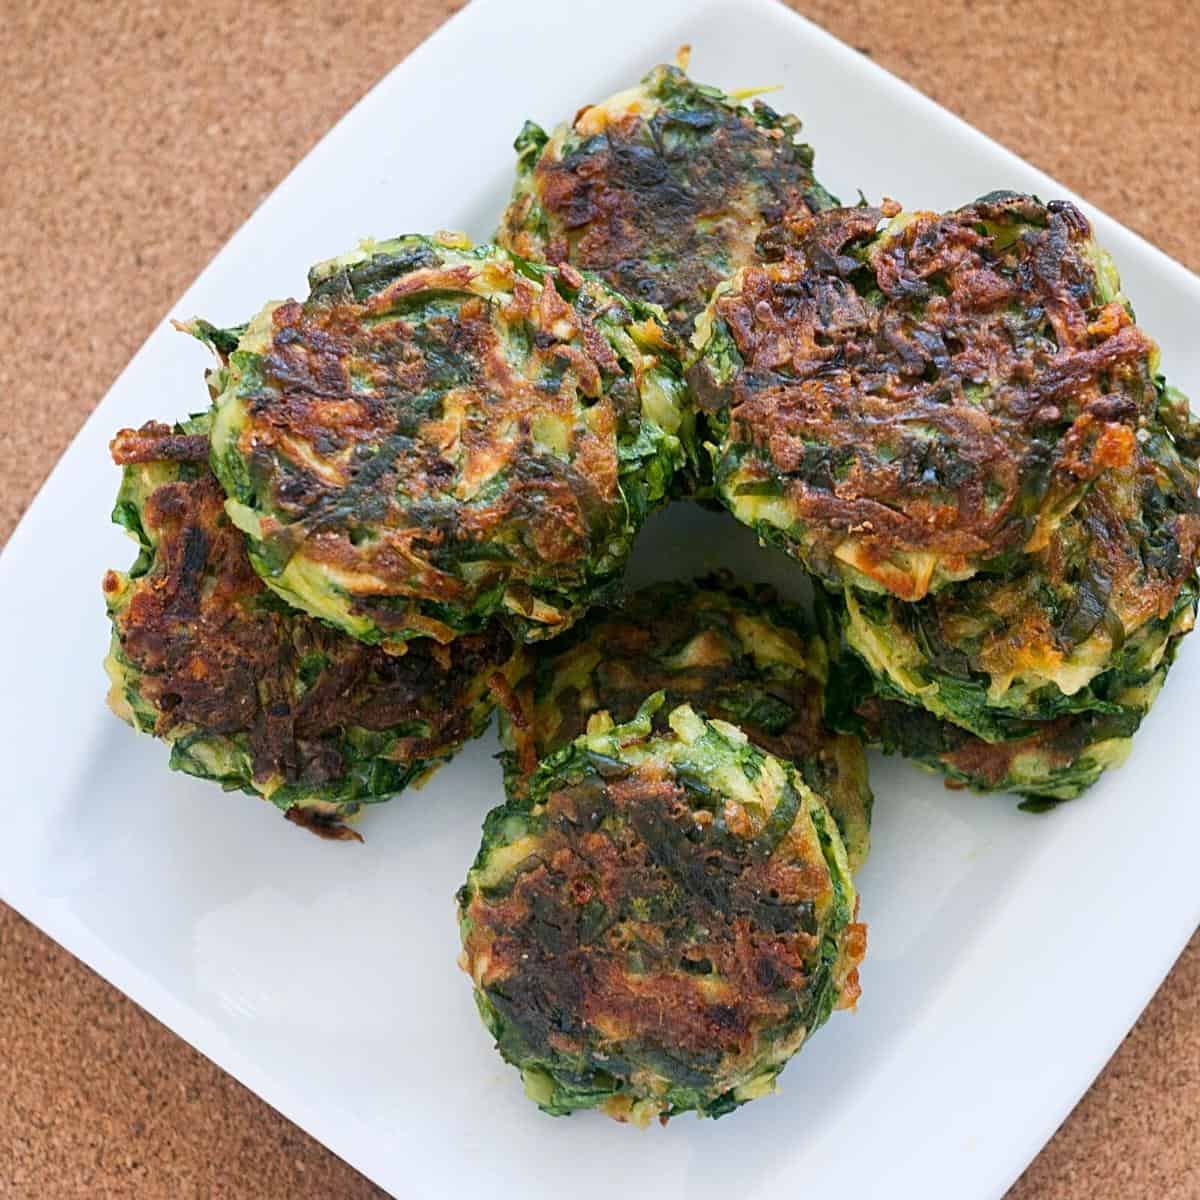 A stack of patties made with spinach and potatoes.